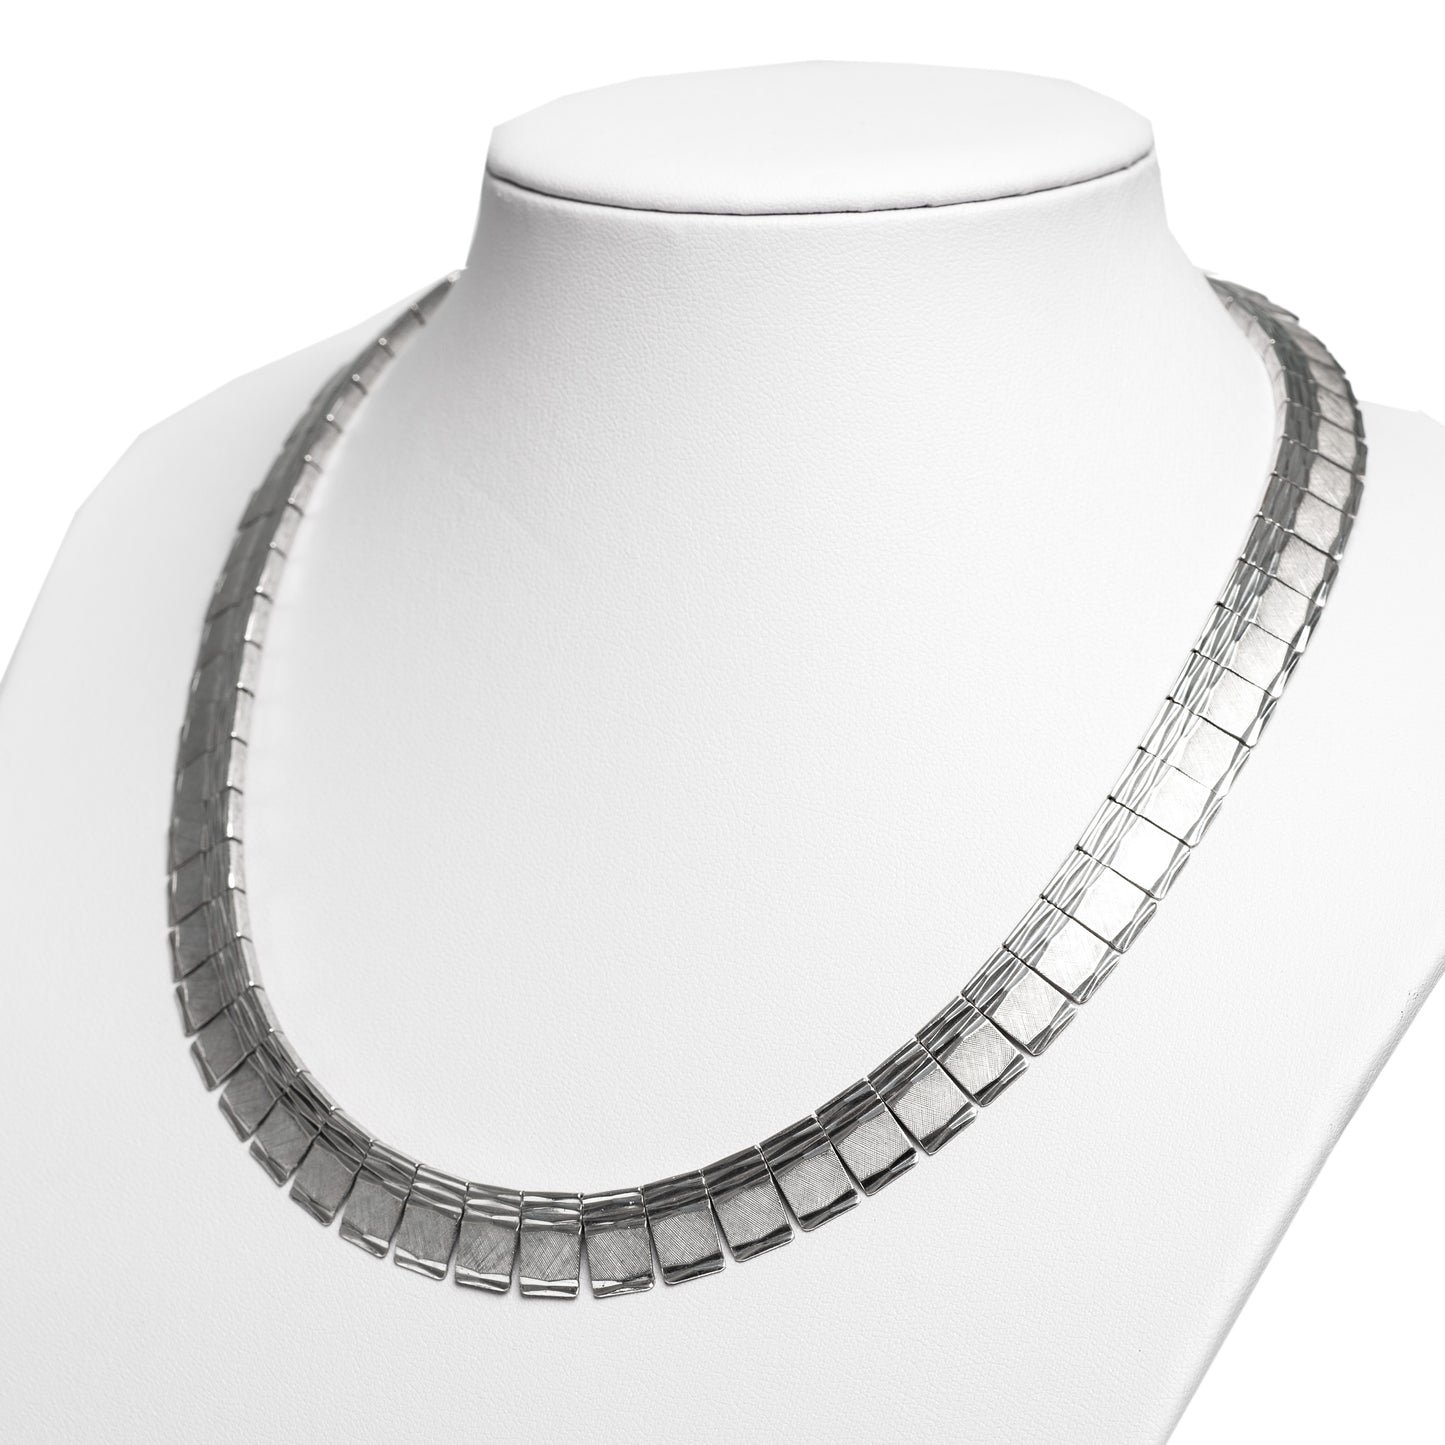 Vintage 1960's High Quality Textured Silver Panel Necklace Hallmarked  (Code A424)